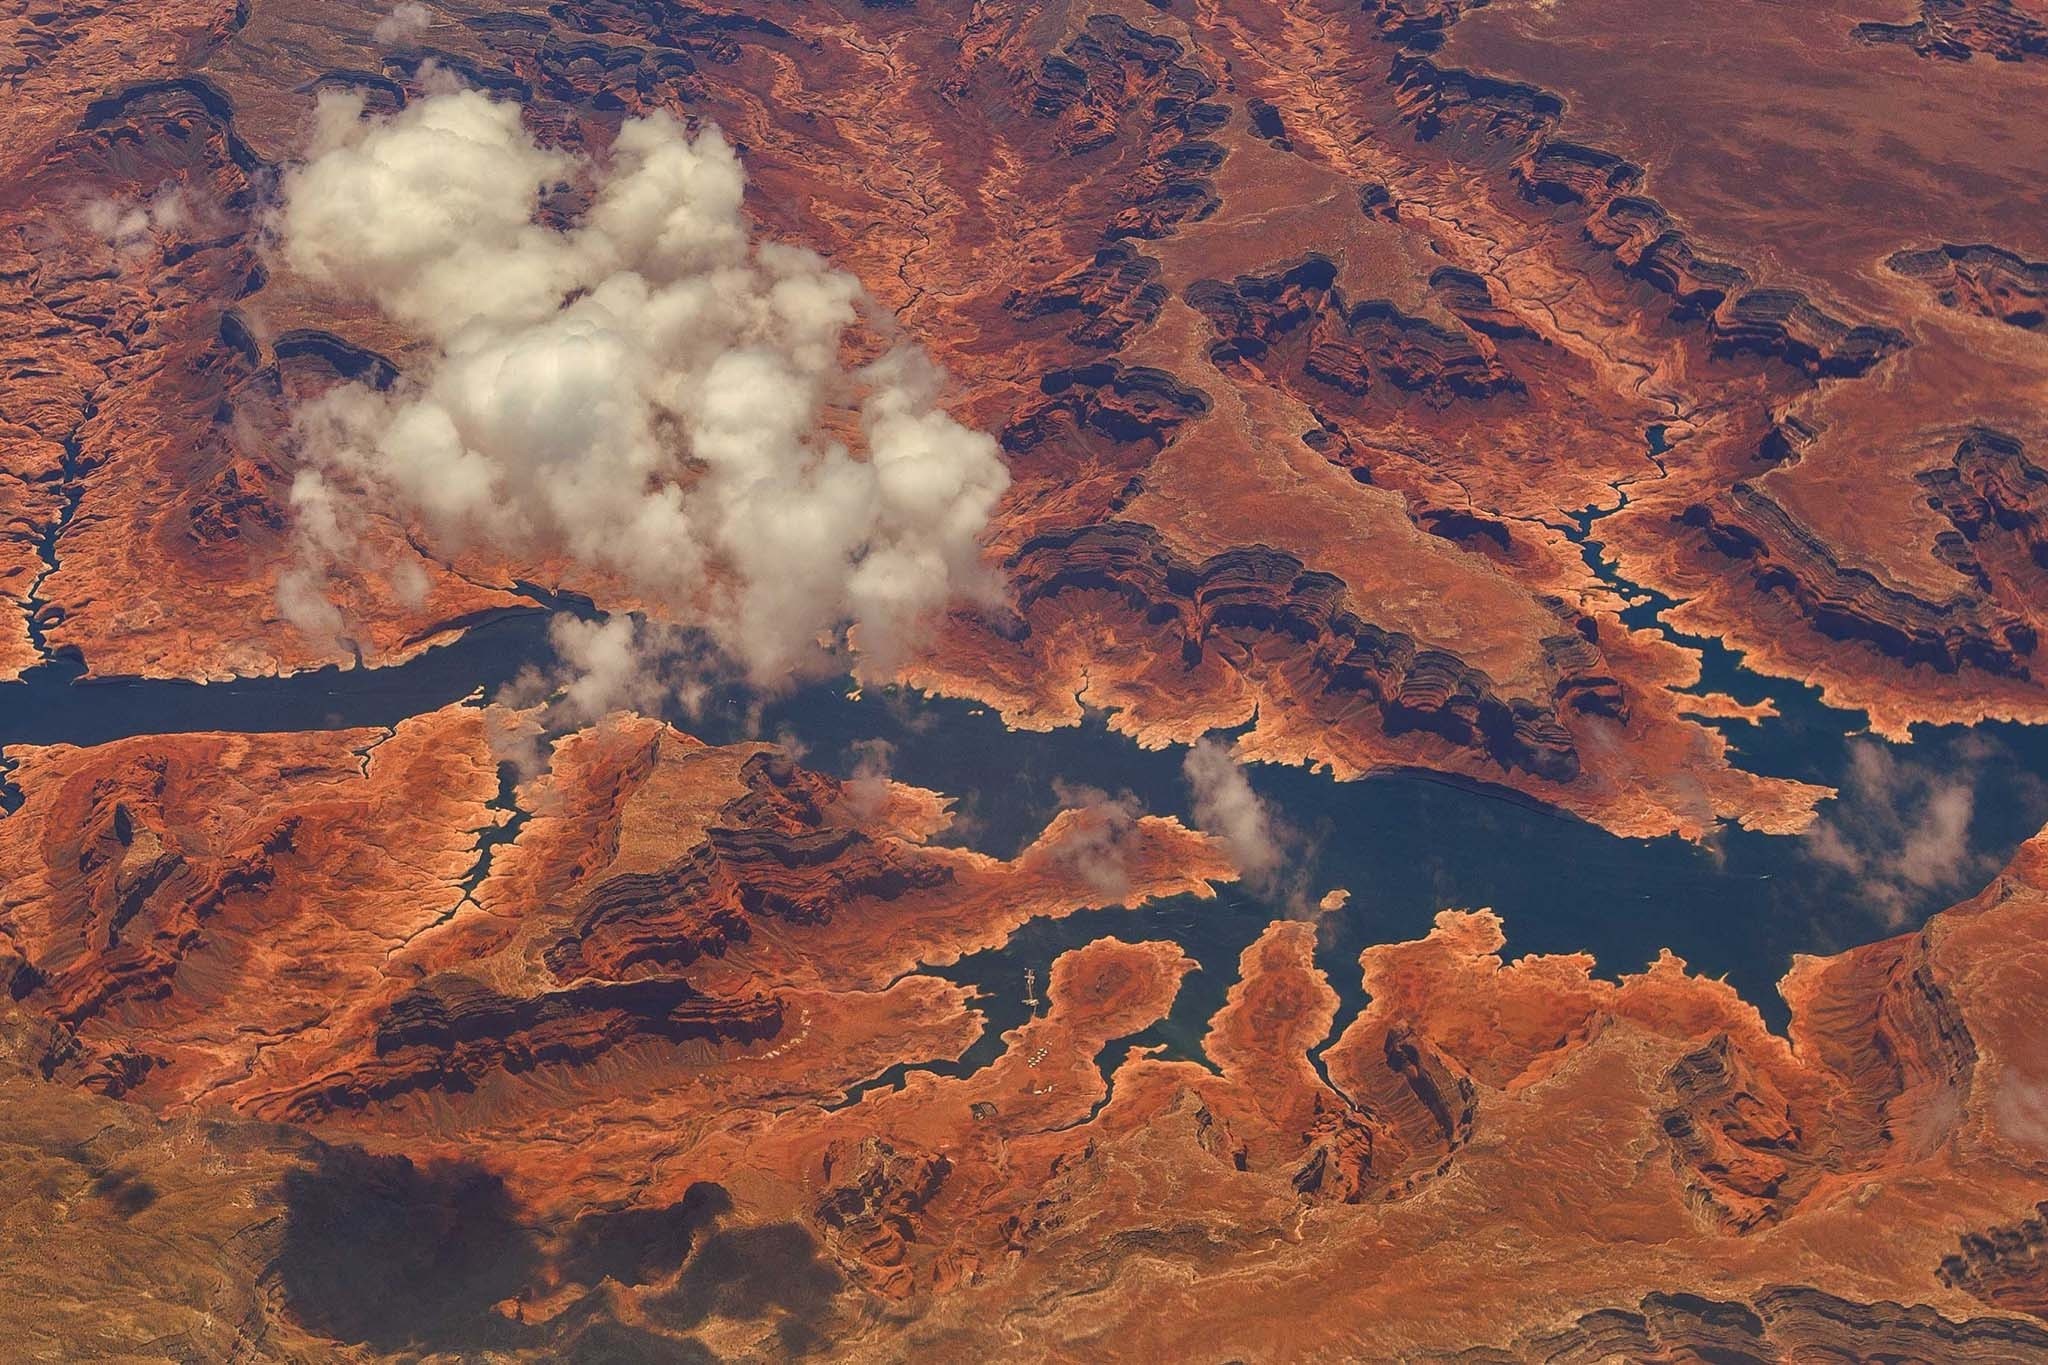 General 2048x1365 nature landscape photography aerial view river canyon desert clouds